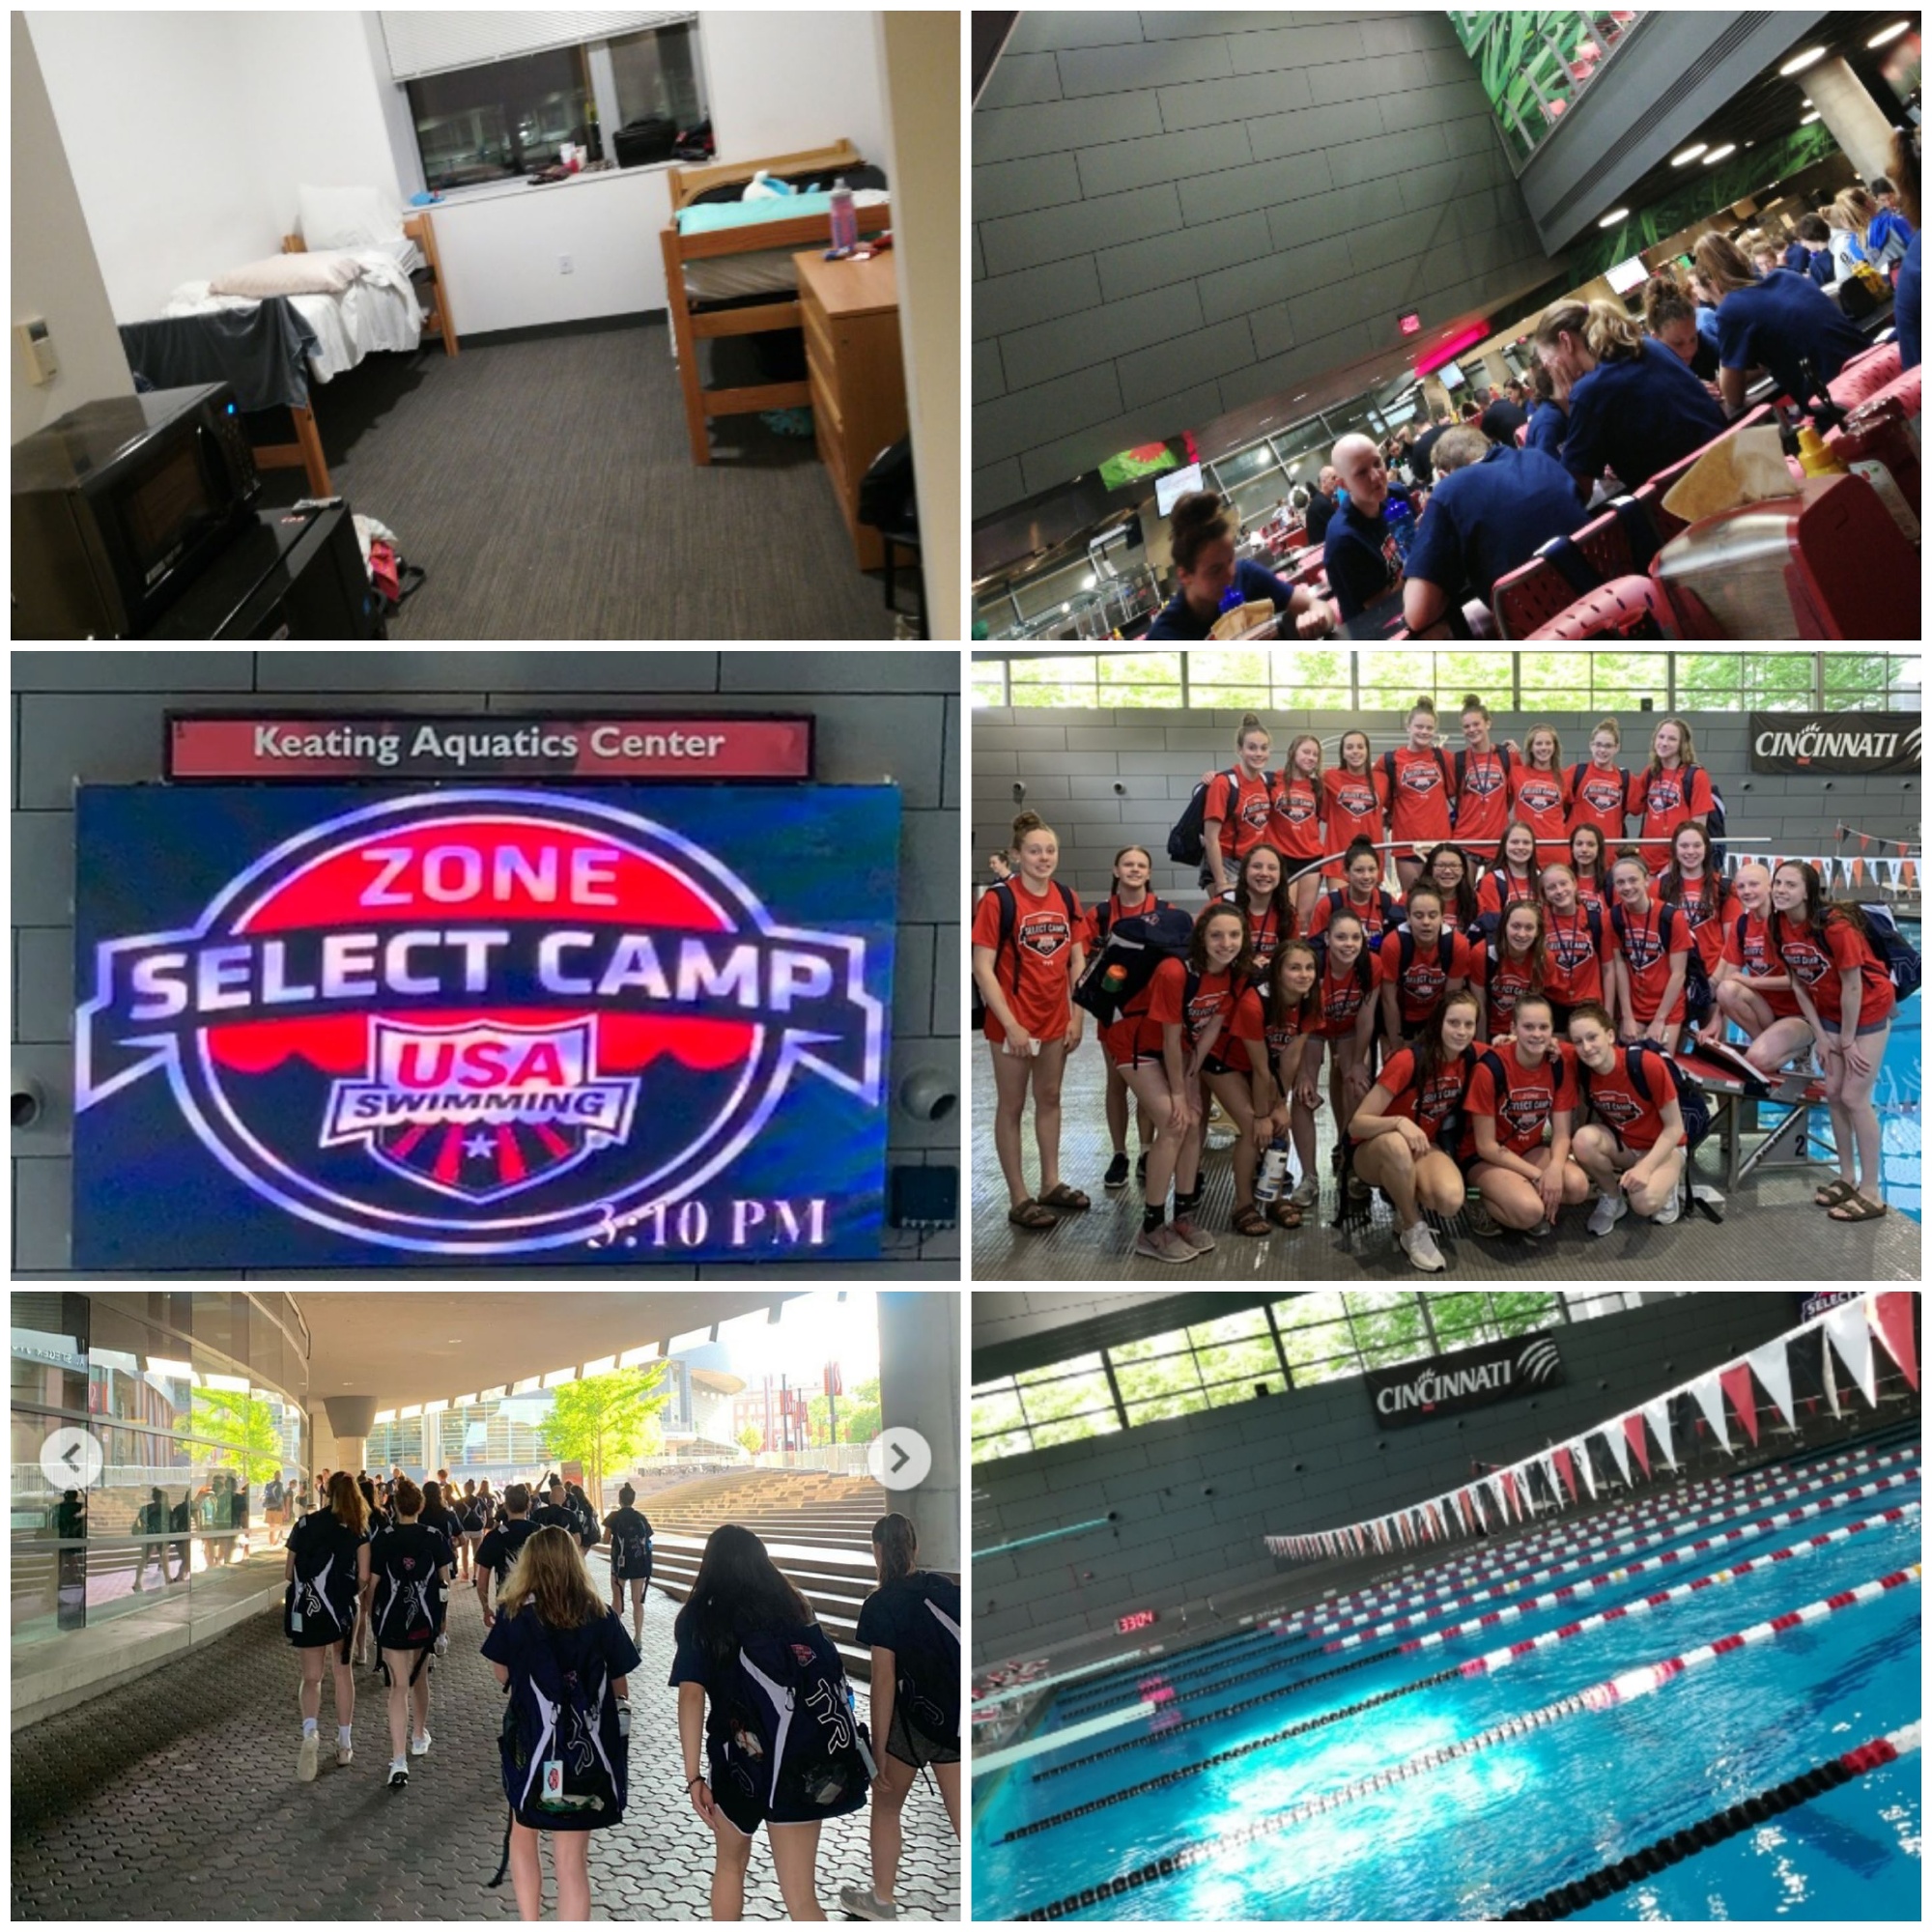 Lily attends the Central Zone Select Camp